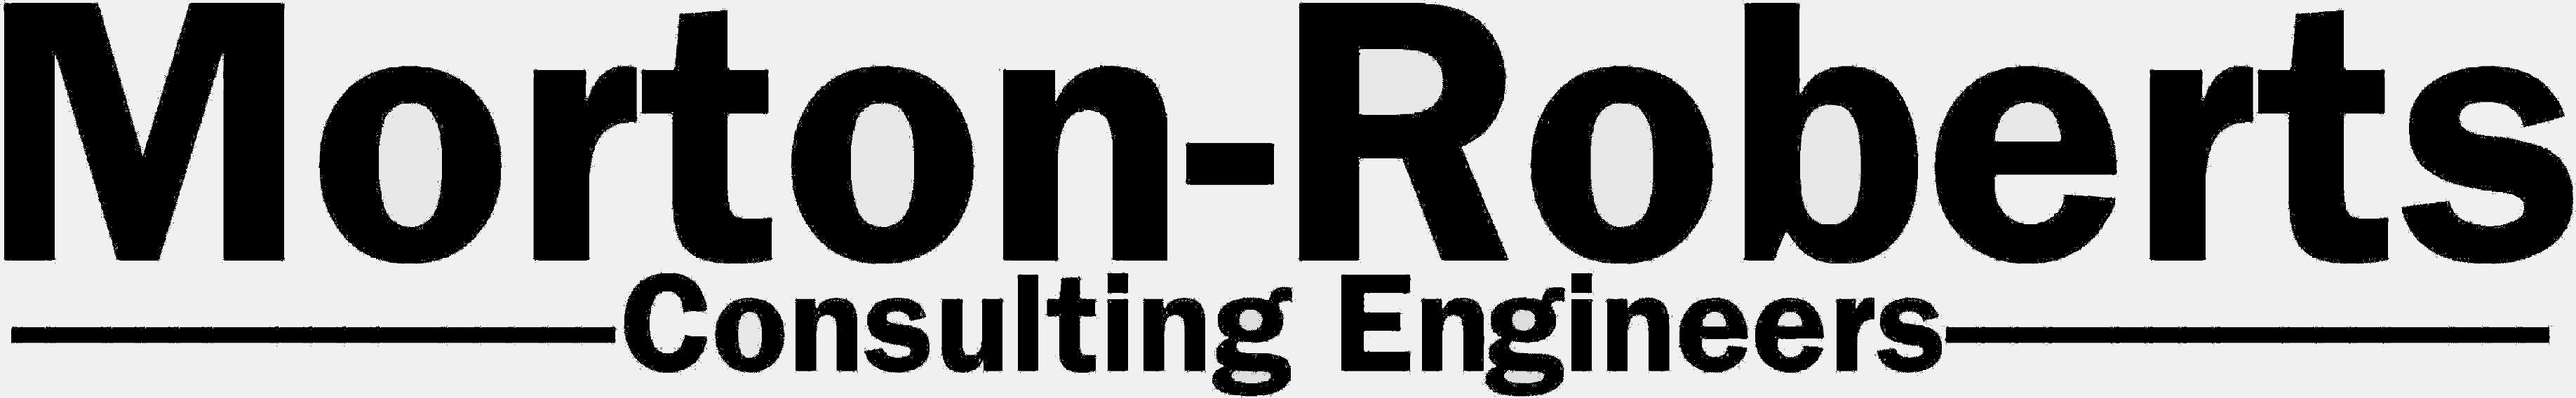 Morton-Roberts Consulting 
Engineers Limited Logo